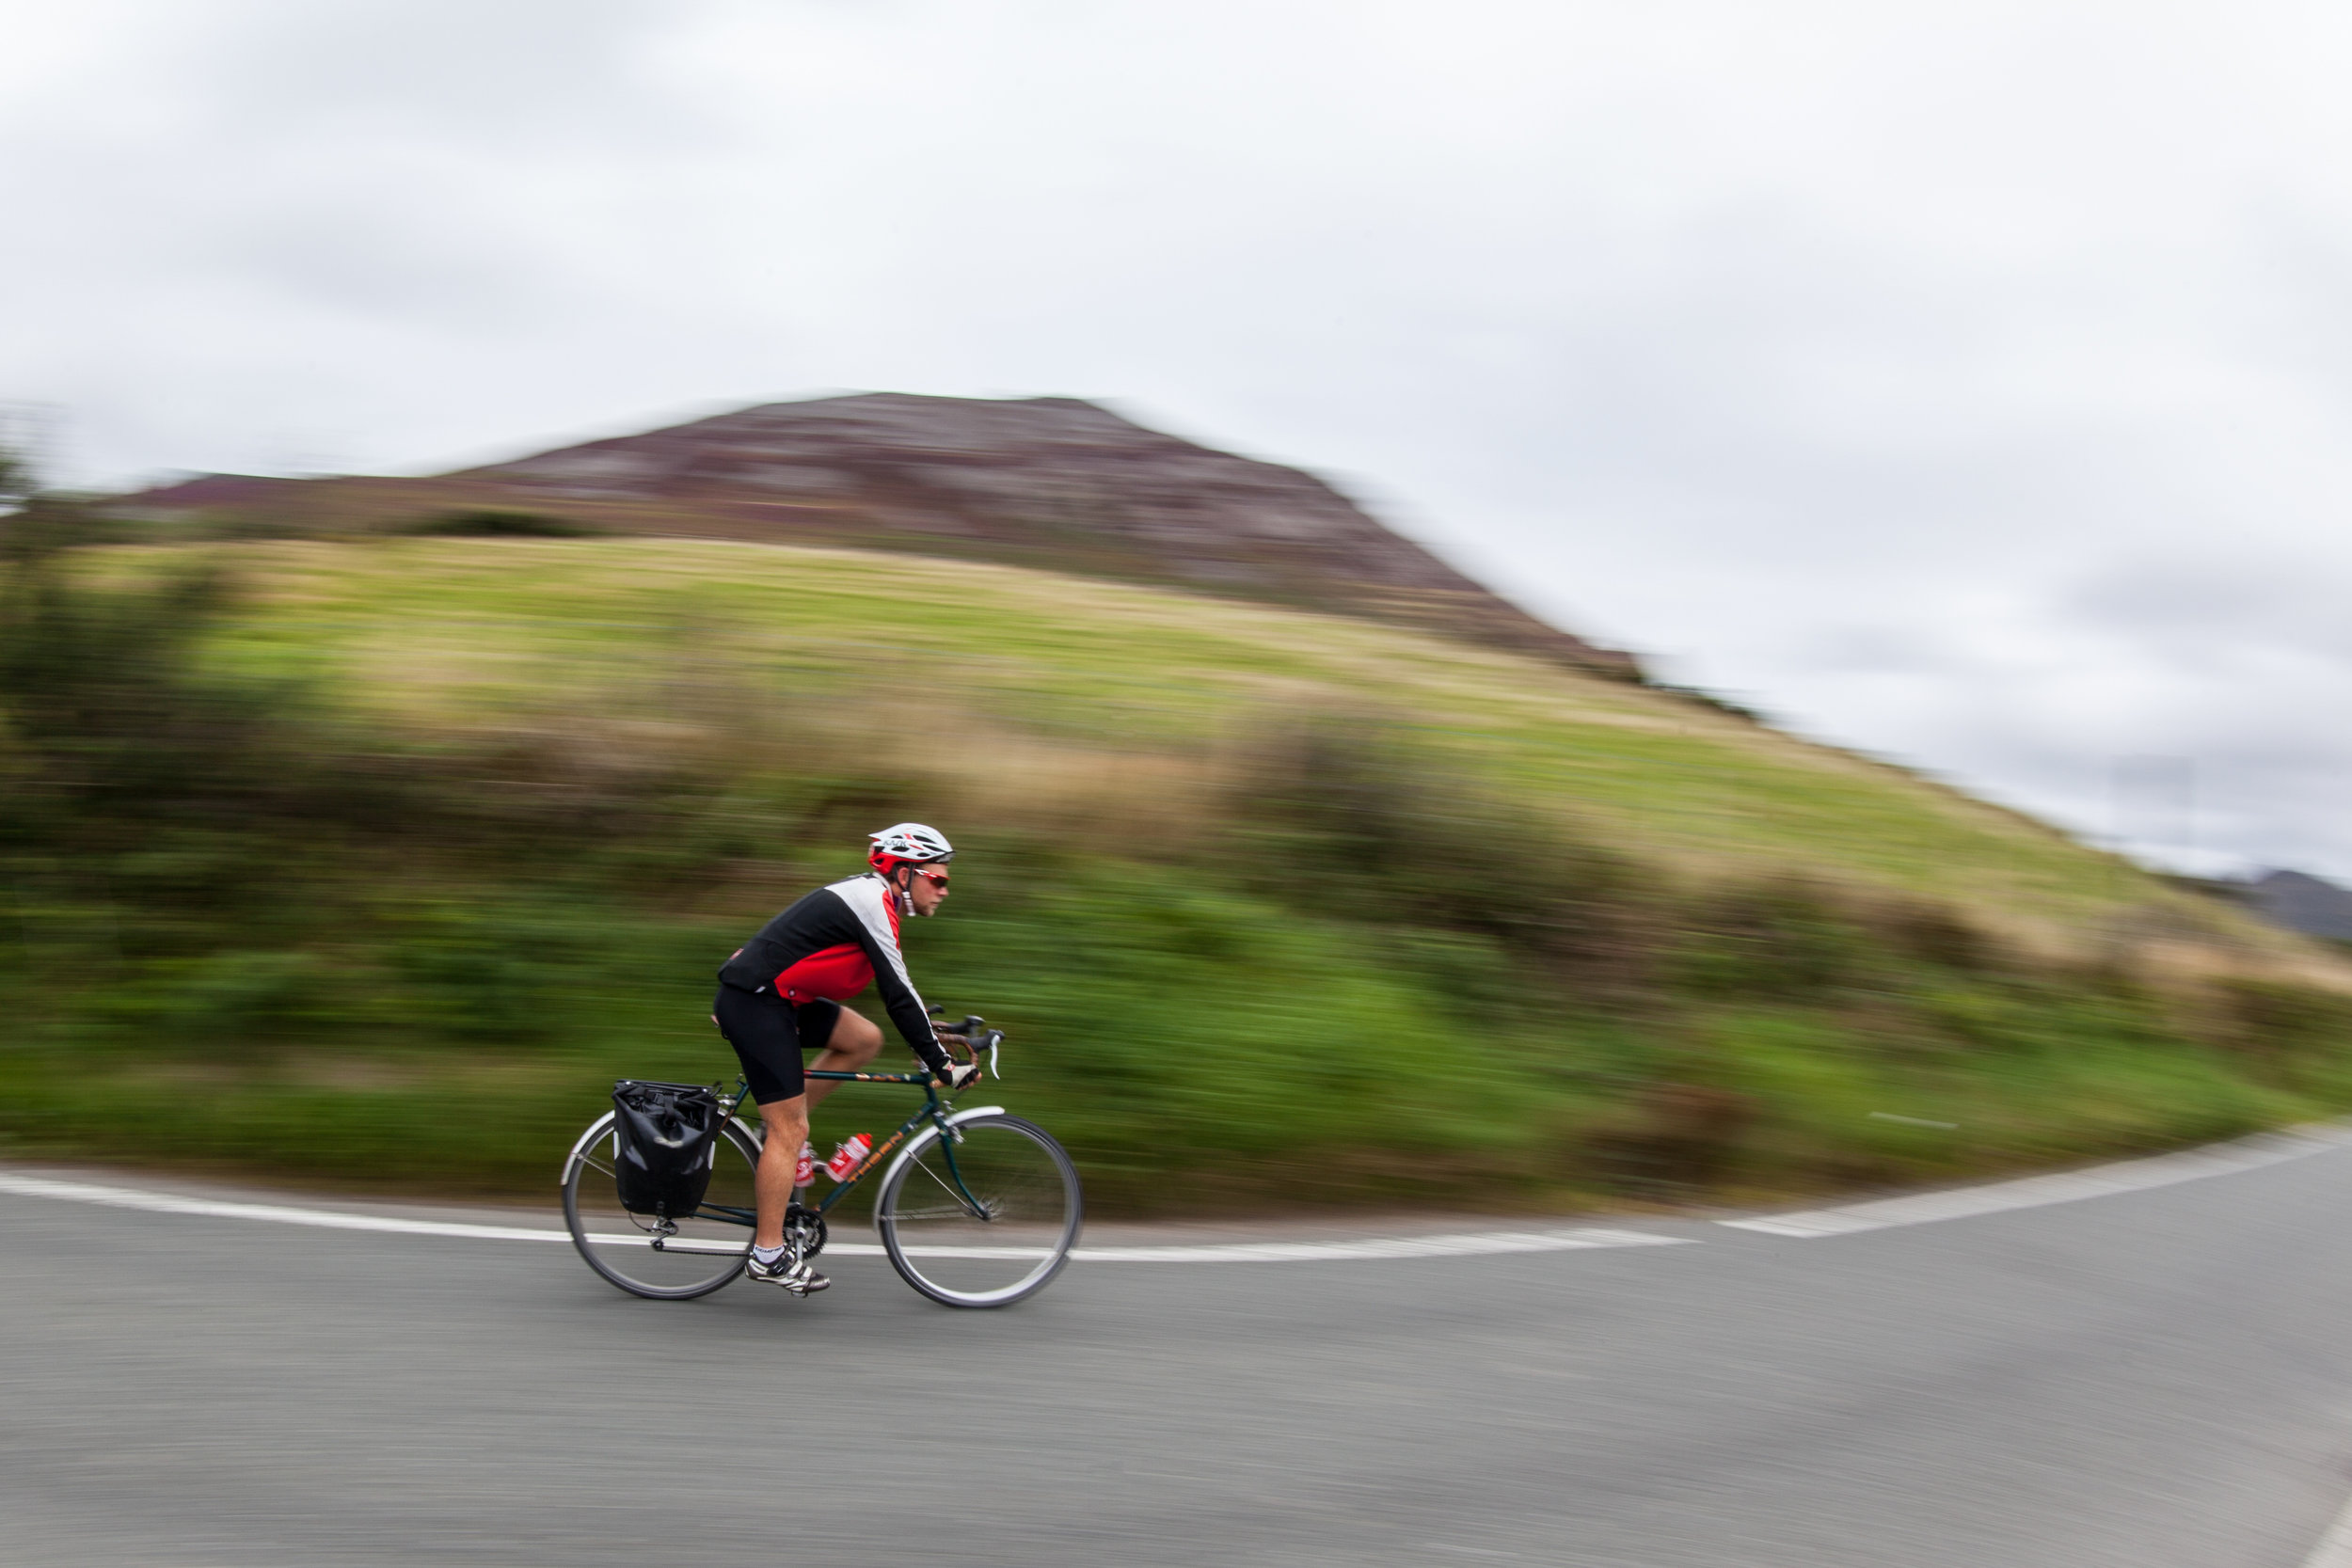 James Cope speeds by on his bicycle in North Wales on the Countrywide Great Tour.